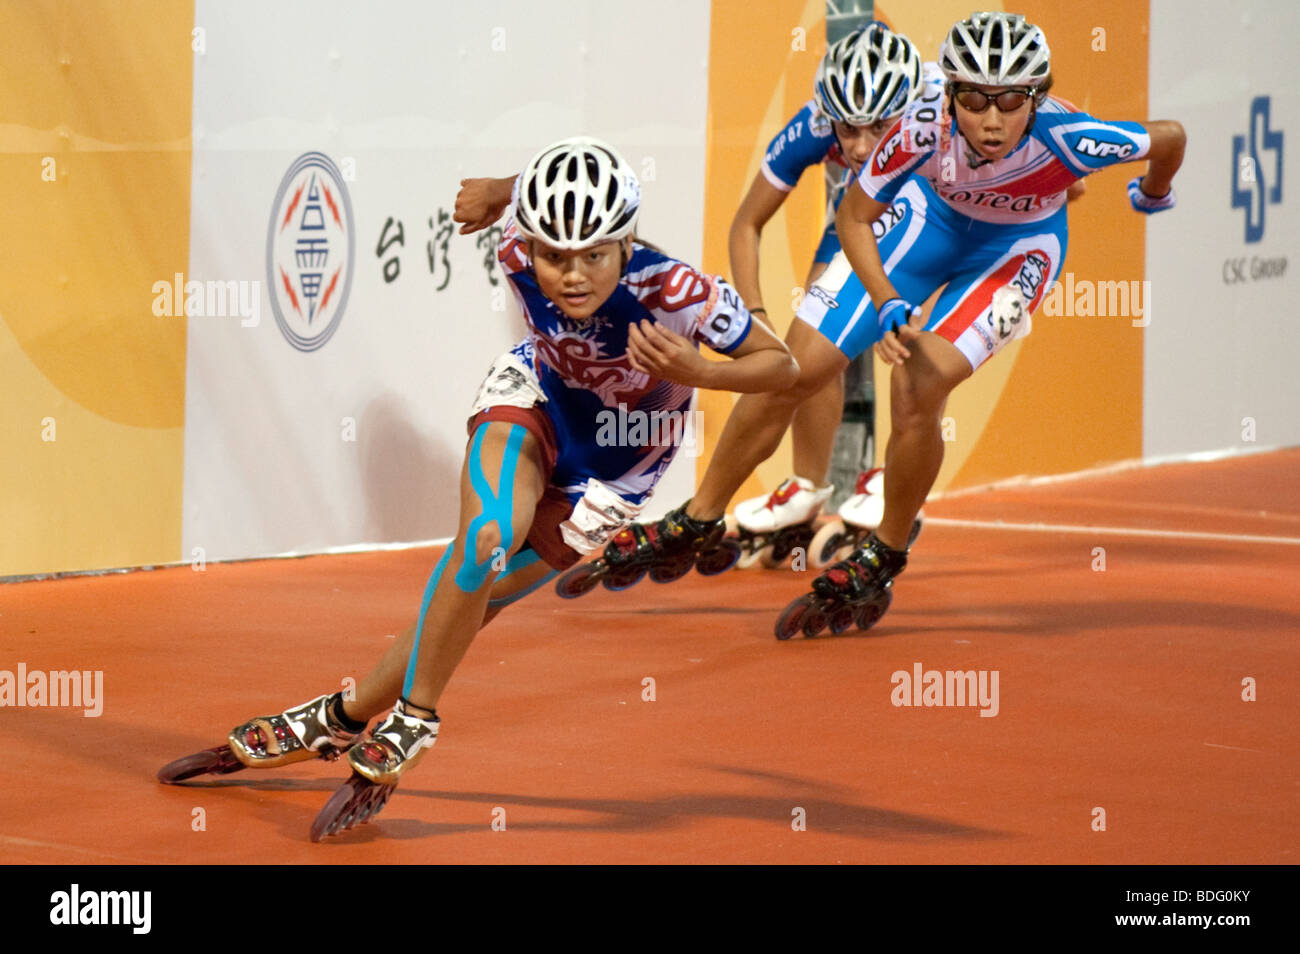 Roller Sports Speed Inline Skating, 500m Sprint, Women's Final, World Games, Kaohsiung, Taiwan, July 19, 2009 Stock Photo